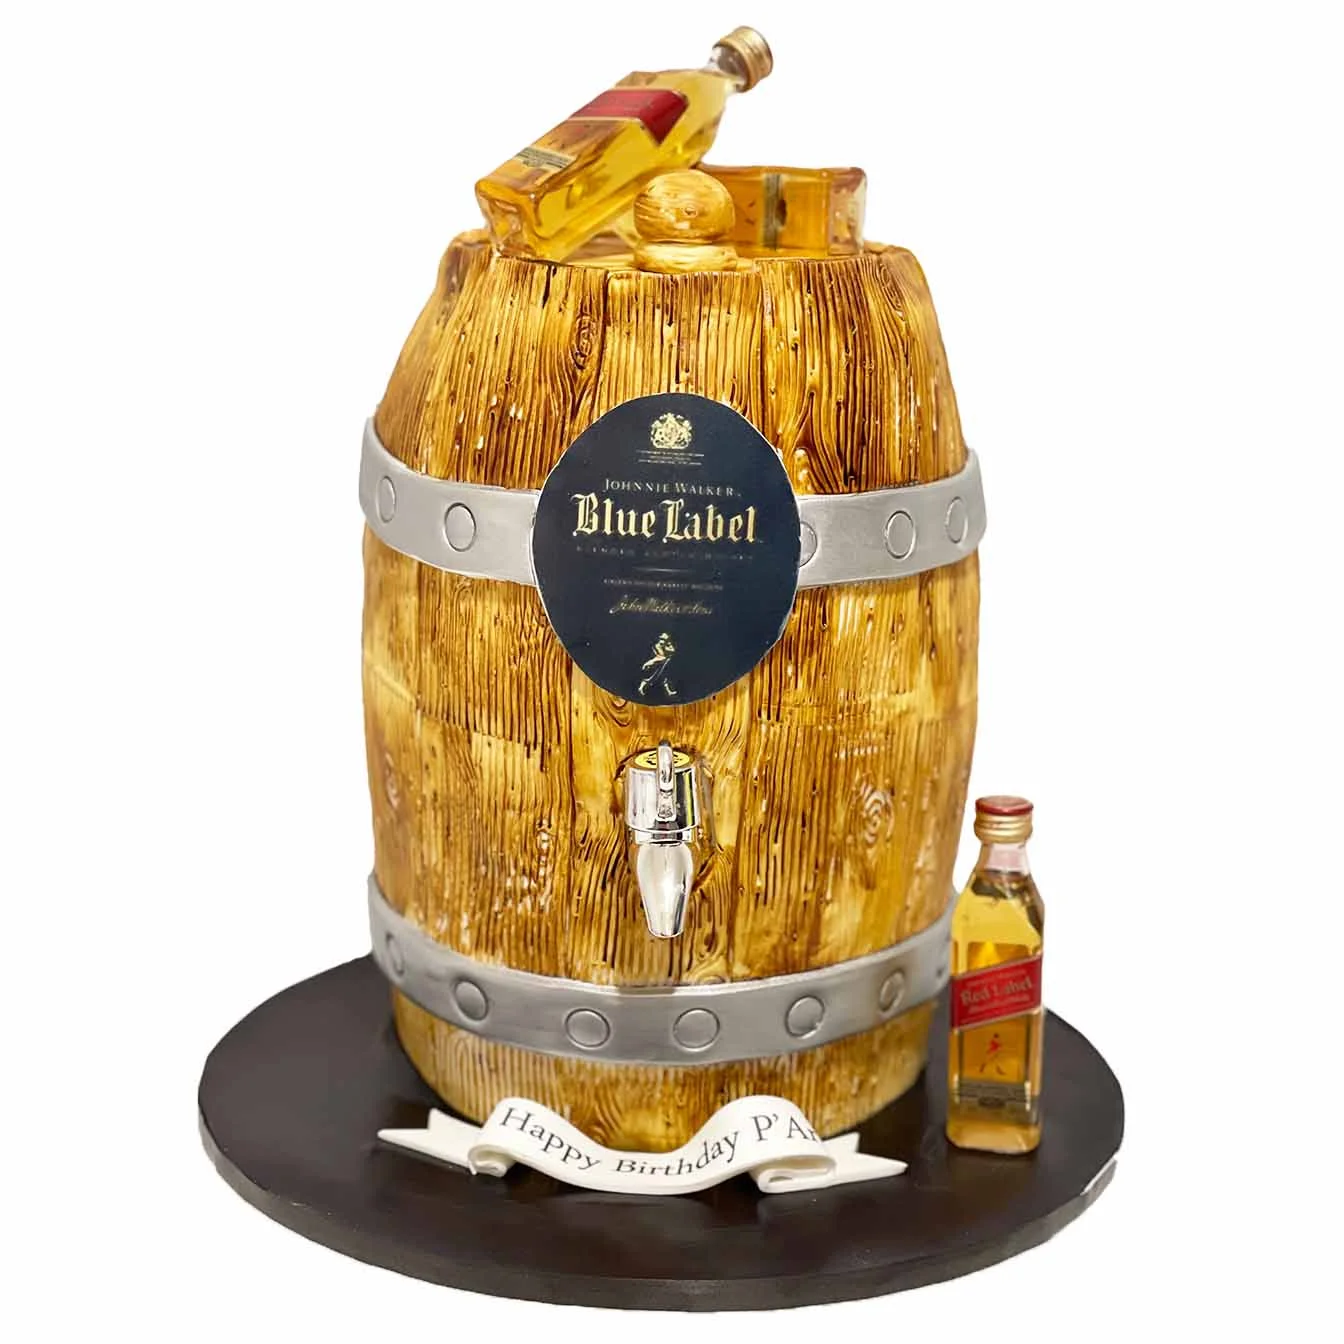 Whiskey Barrel Tap Cake - A stunning cake shaped like a rustic whiskey barrel, featuring a working tap that allows you to select your favorite whiskey or spirit, an extraordinary centerpiece for an unforgettable celebration.